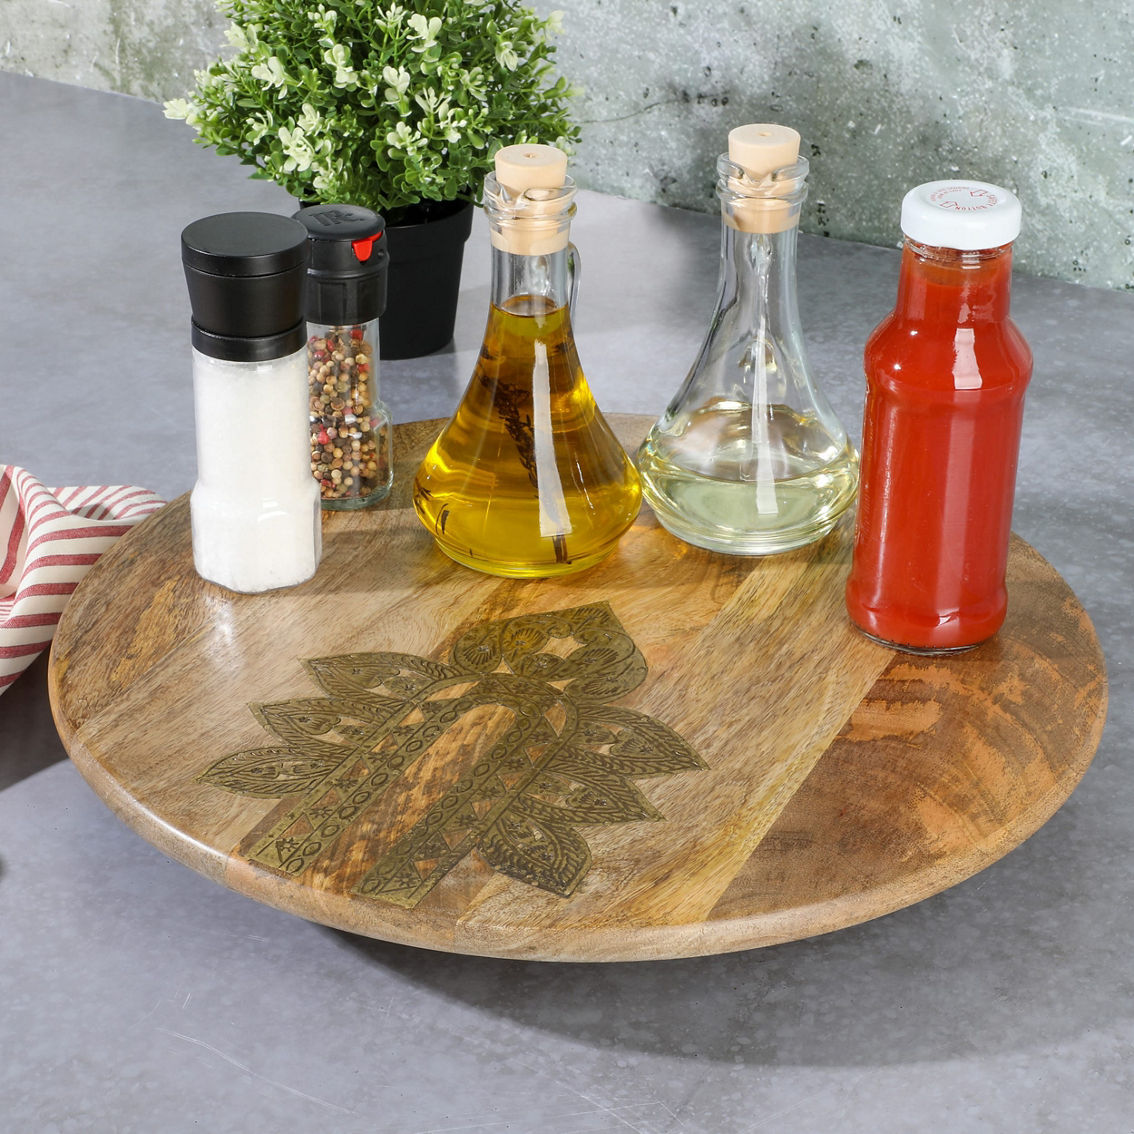 Cravings By Chrissy Teigen 16 Inch Round Mango Wood Lazy Susan with Metal Inlay - Image 4 of 4